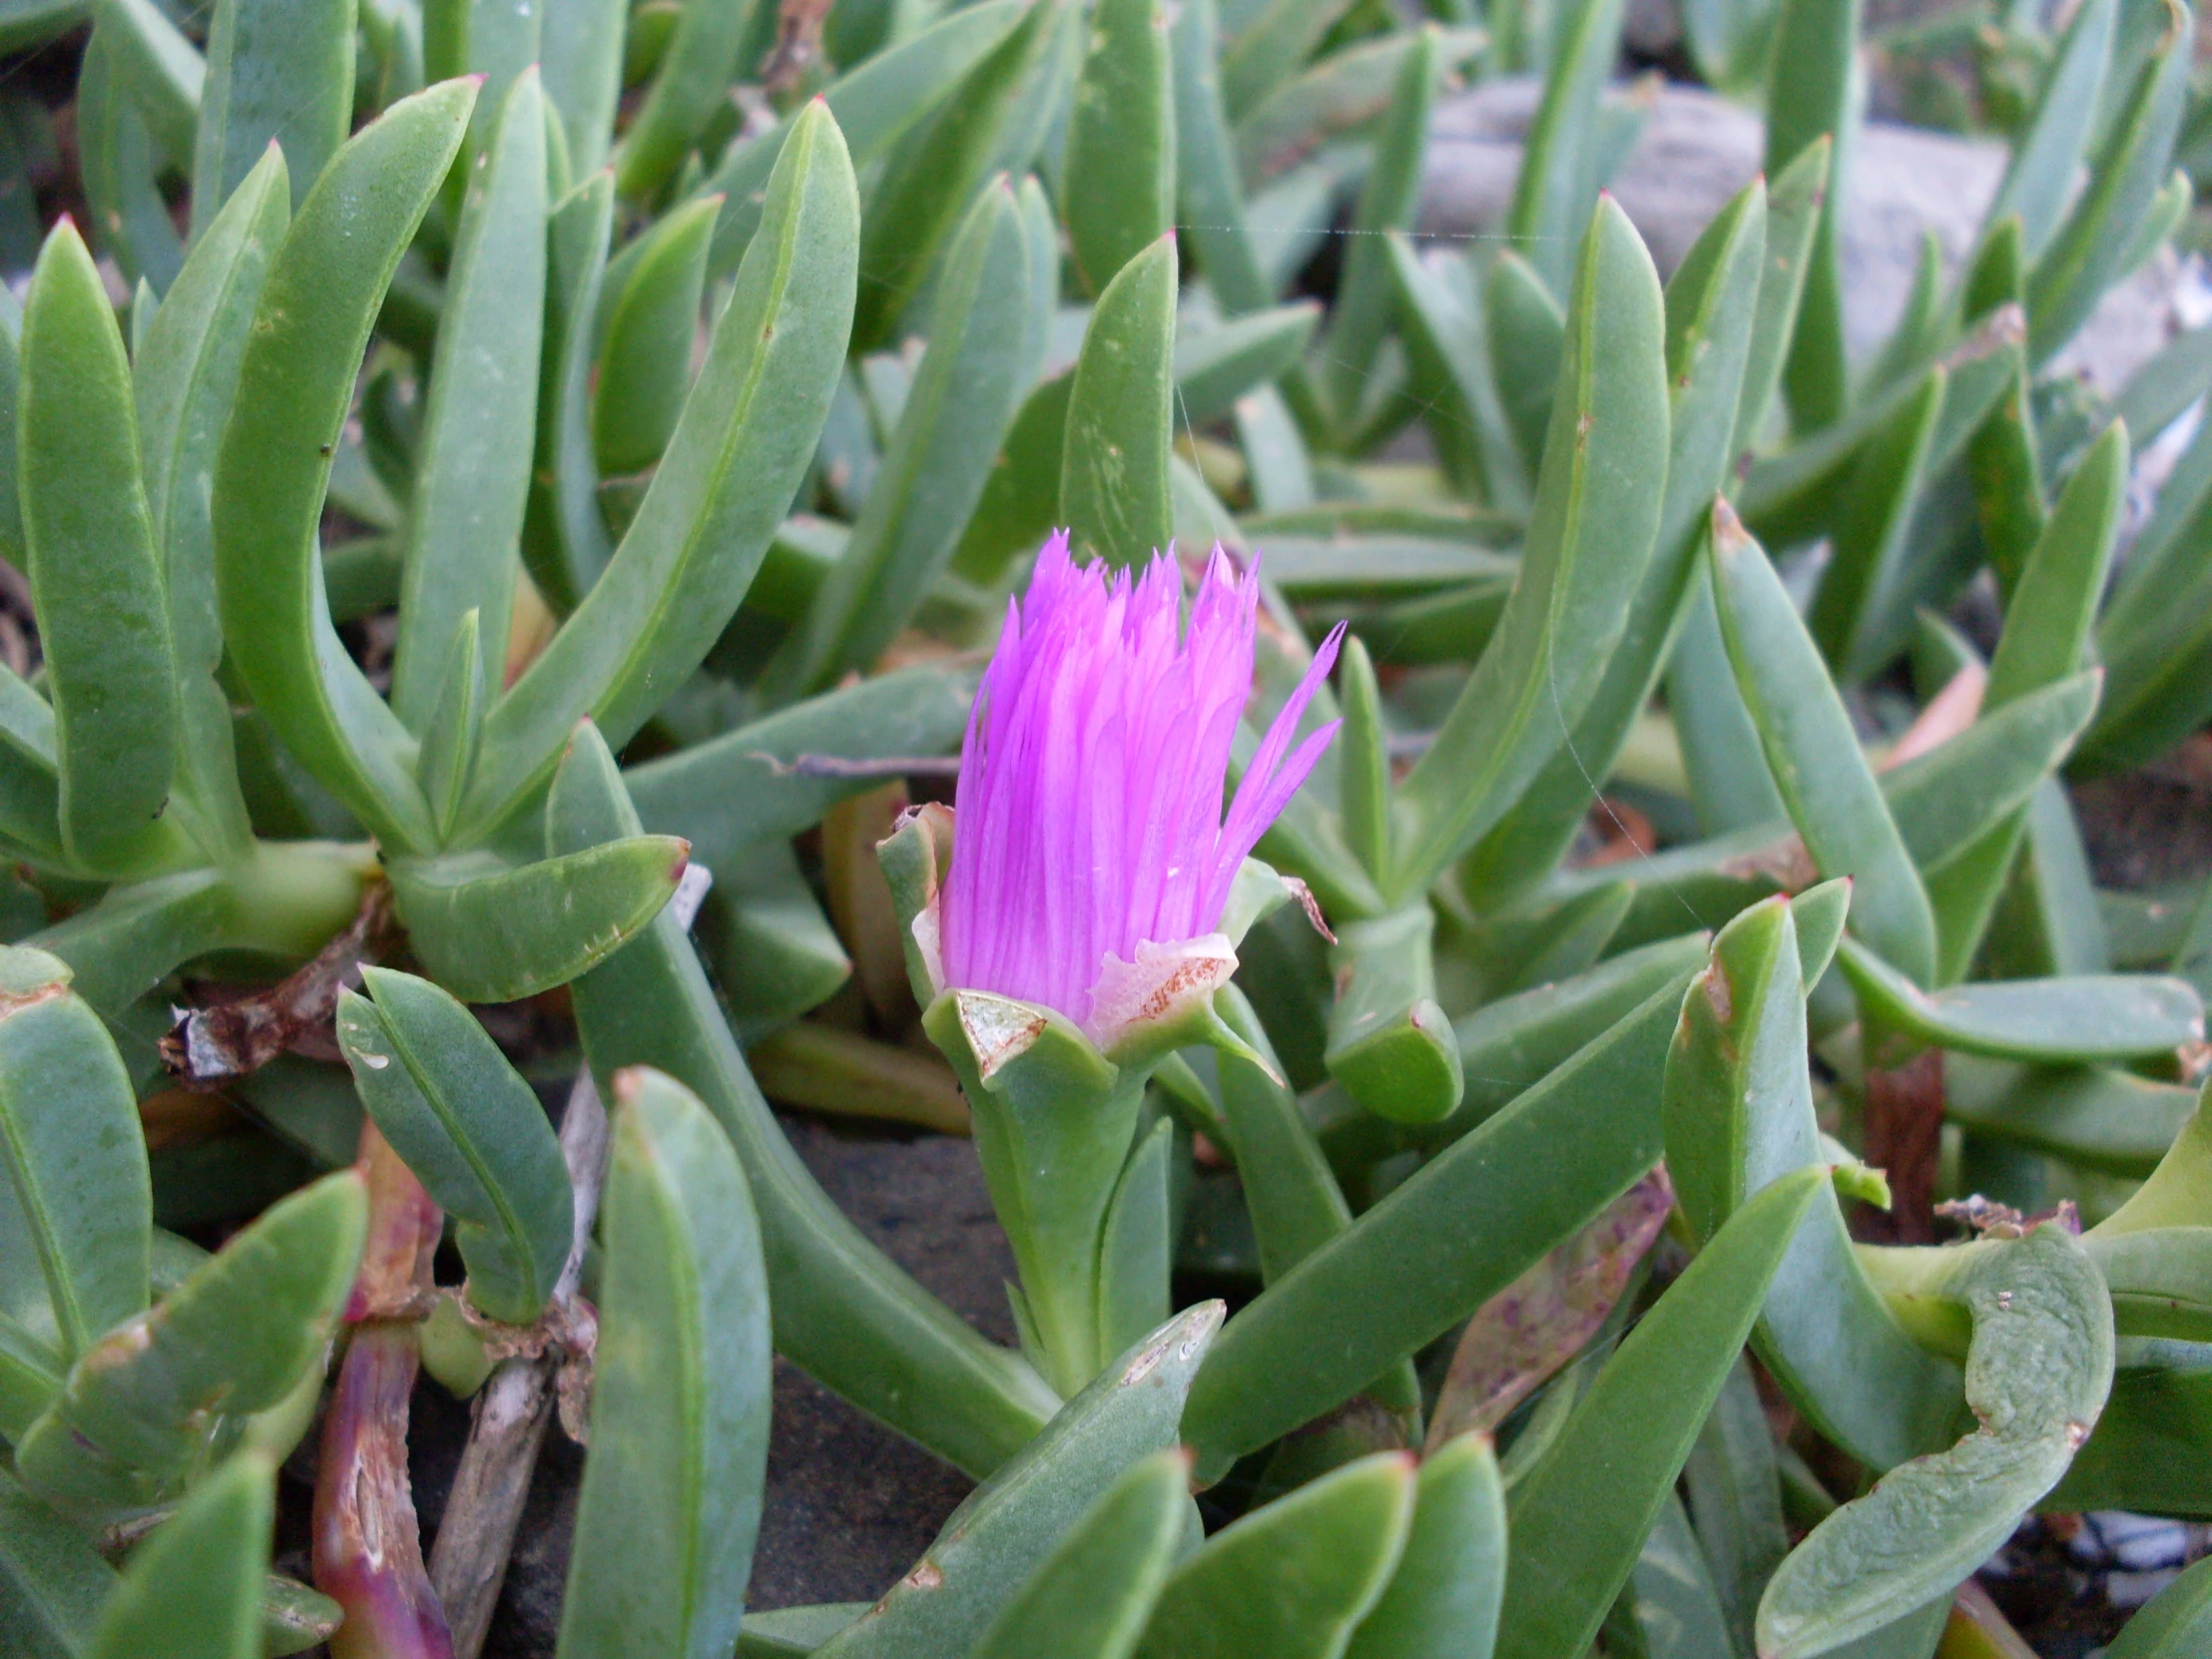 a single flower is pictured in this closeup picture